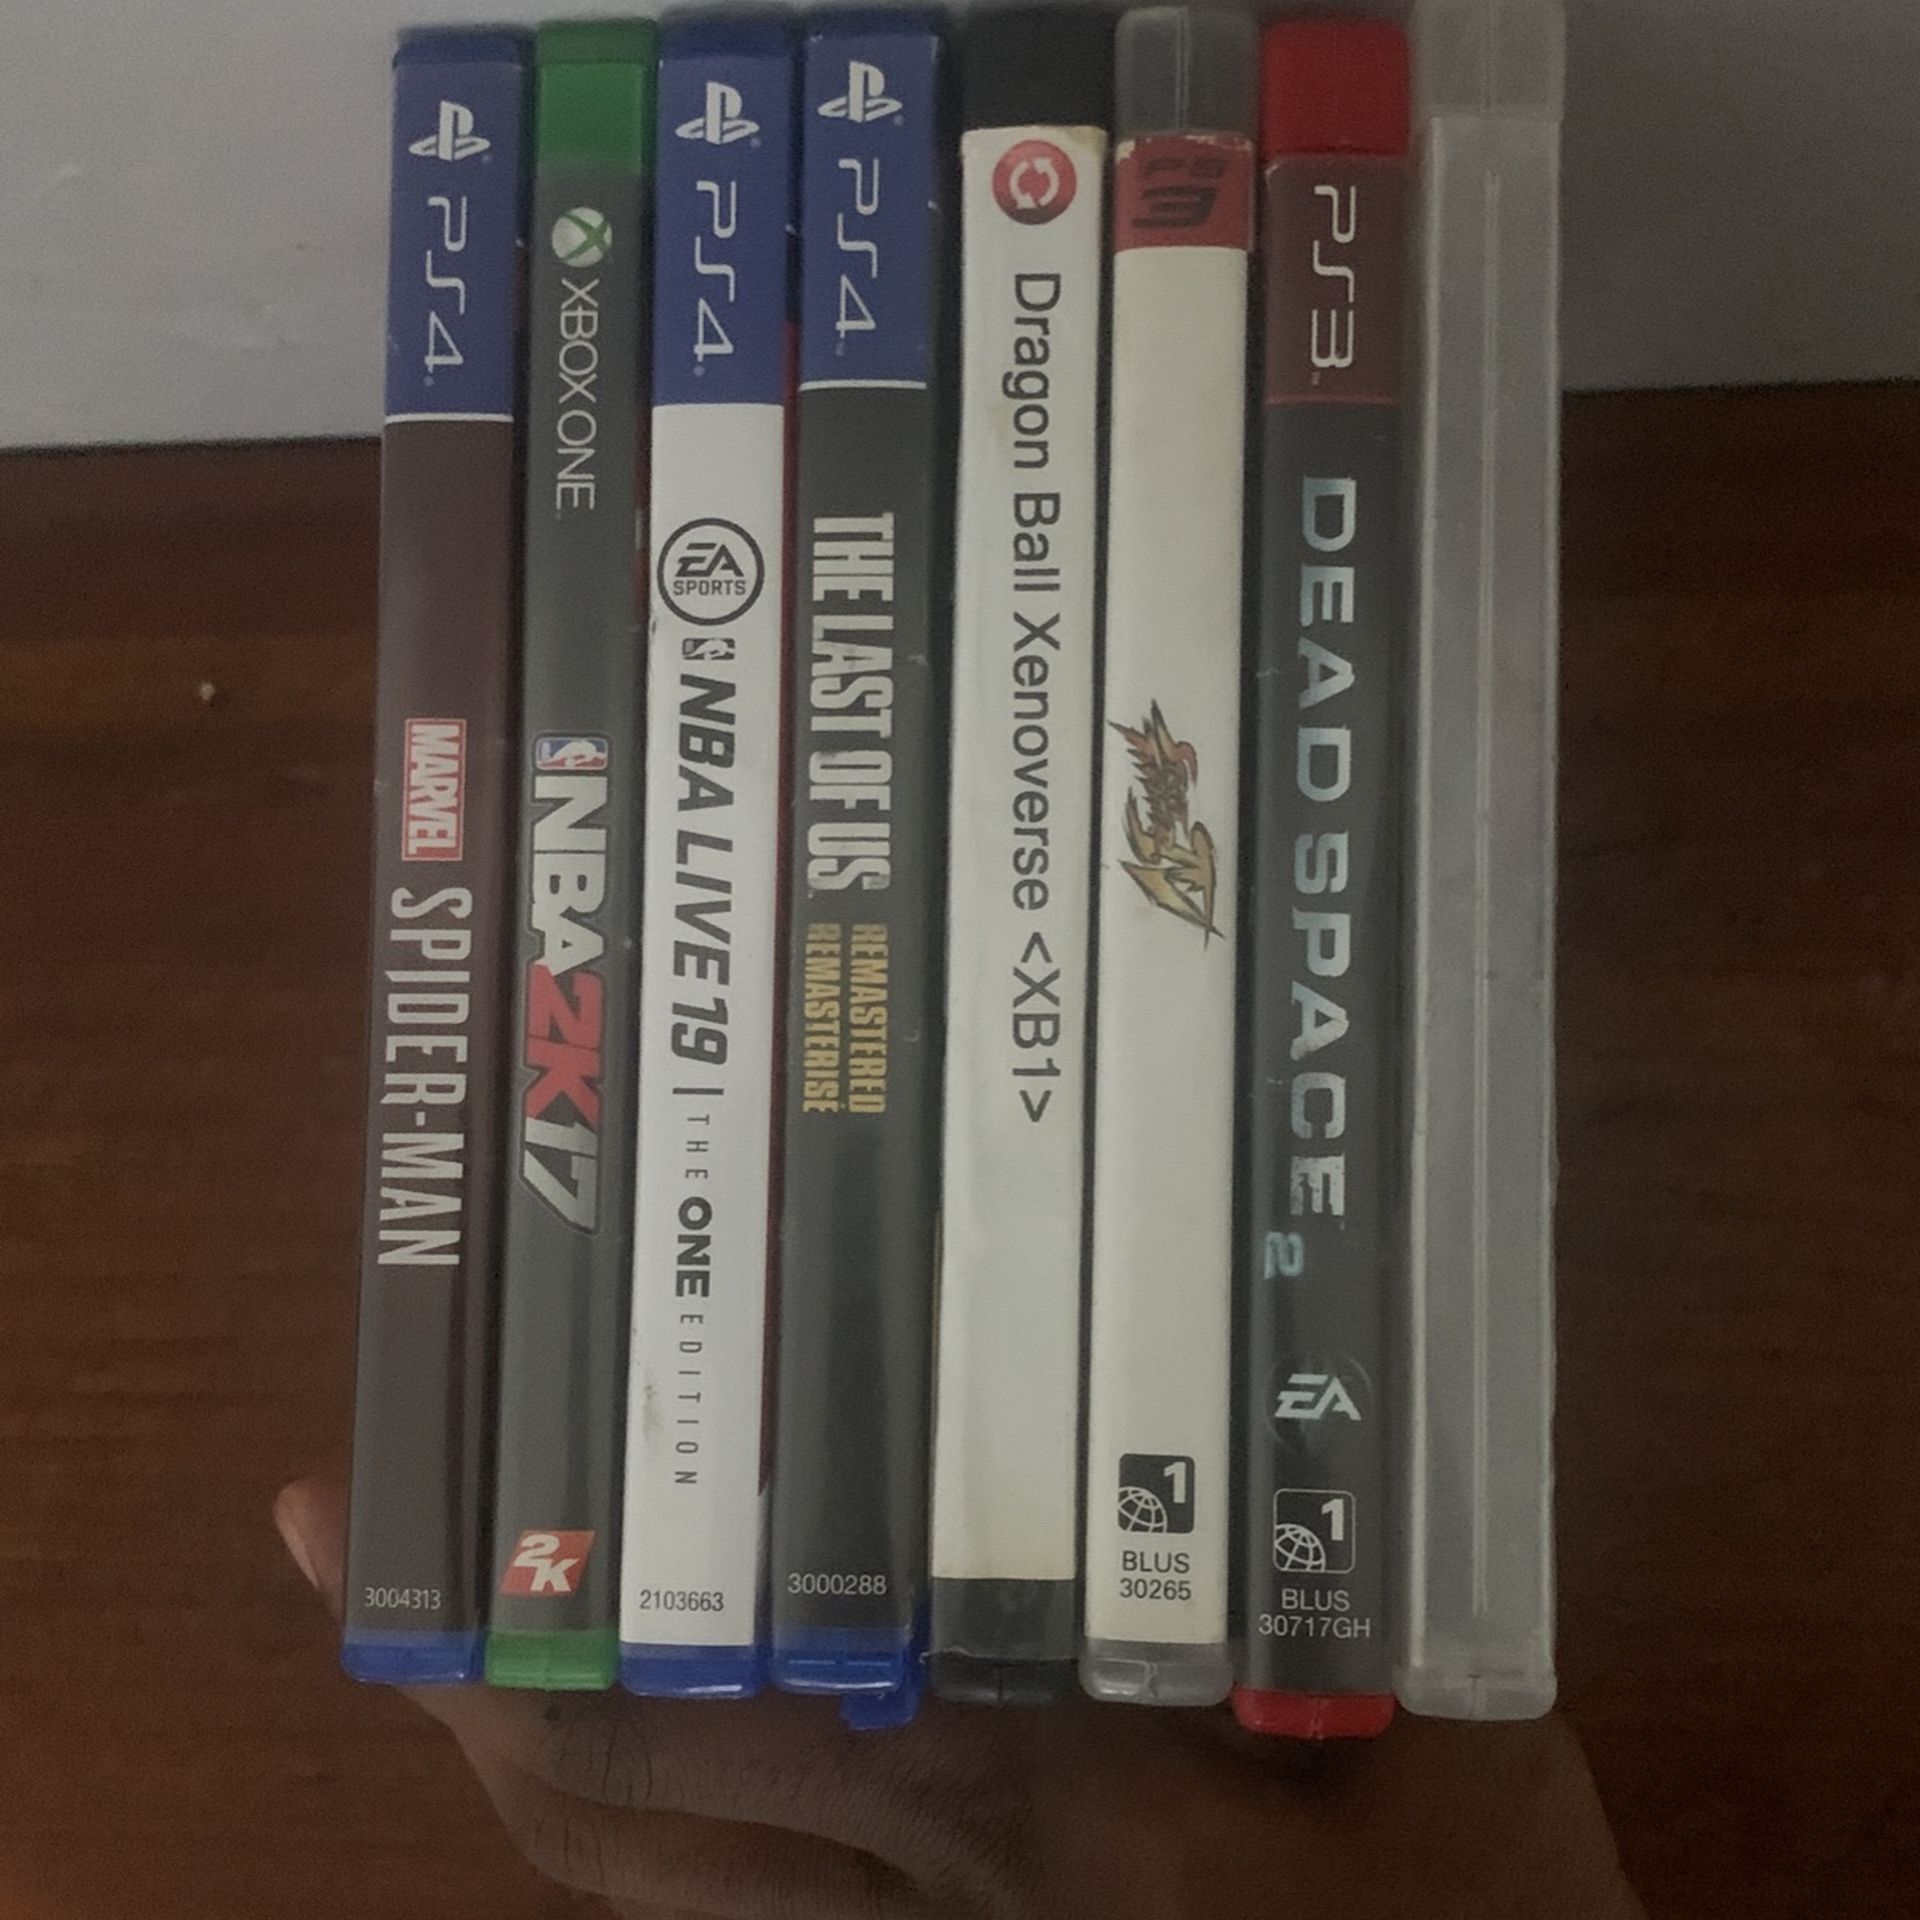 PS4 And PS3 Games And 2 Xbox One Games